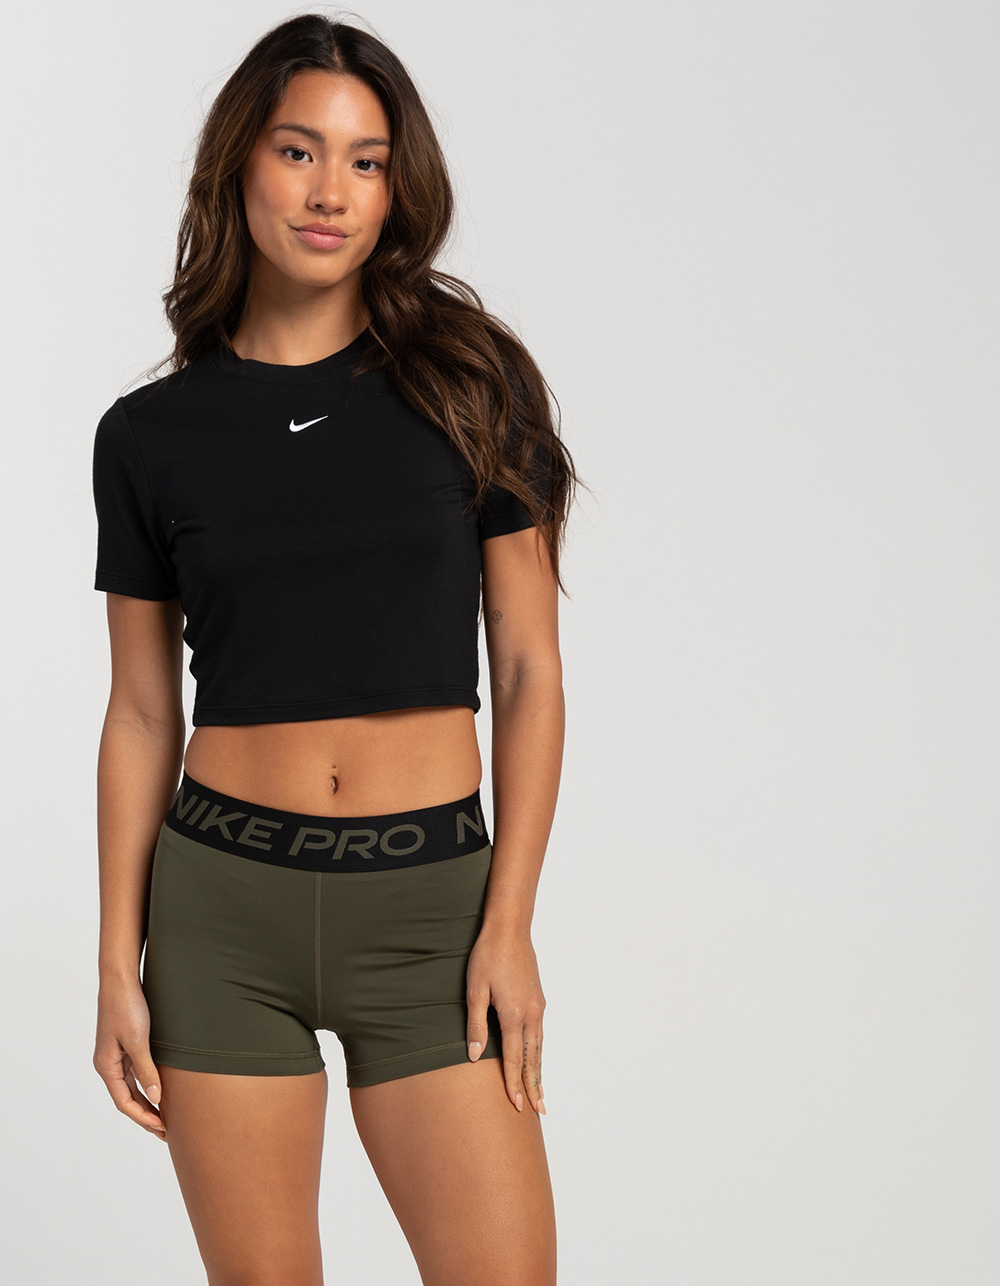 Women's Activewear Tops for Sale -   Nike pros, Nike outfits,  Compression shorts